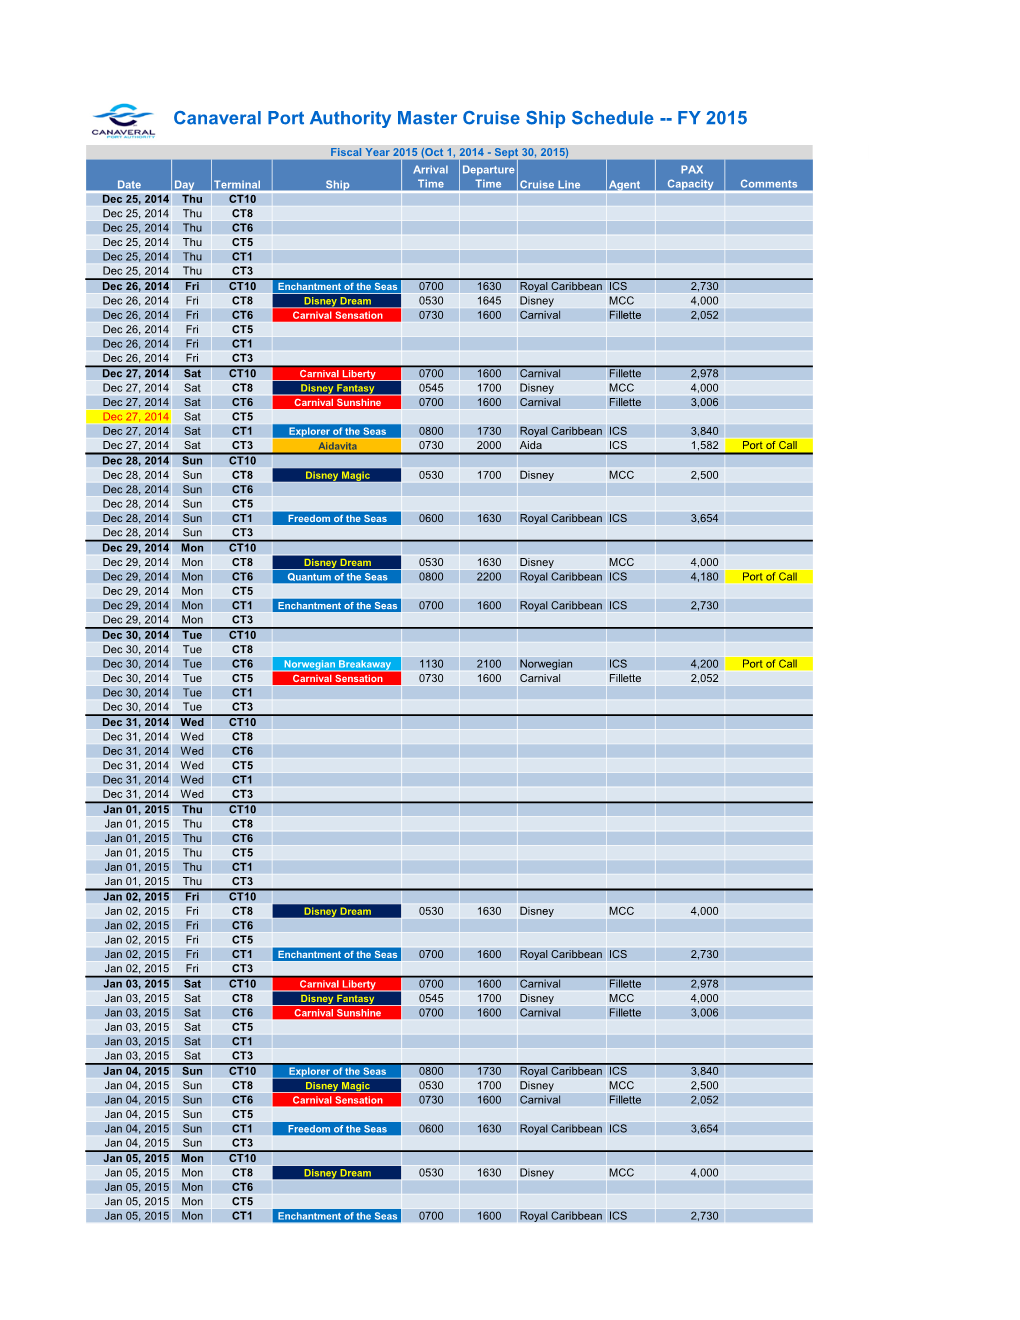 Canaveral Port Authority Master Cruise Ship Schedule -- FY 2015